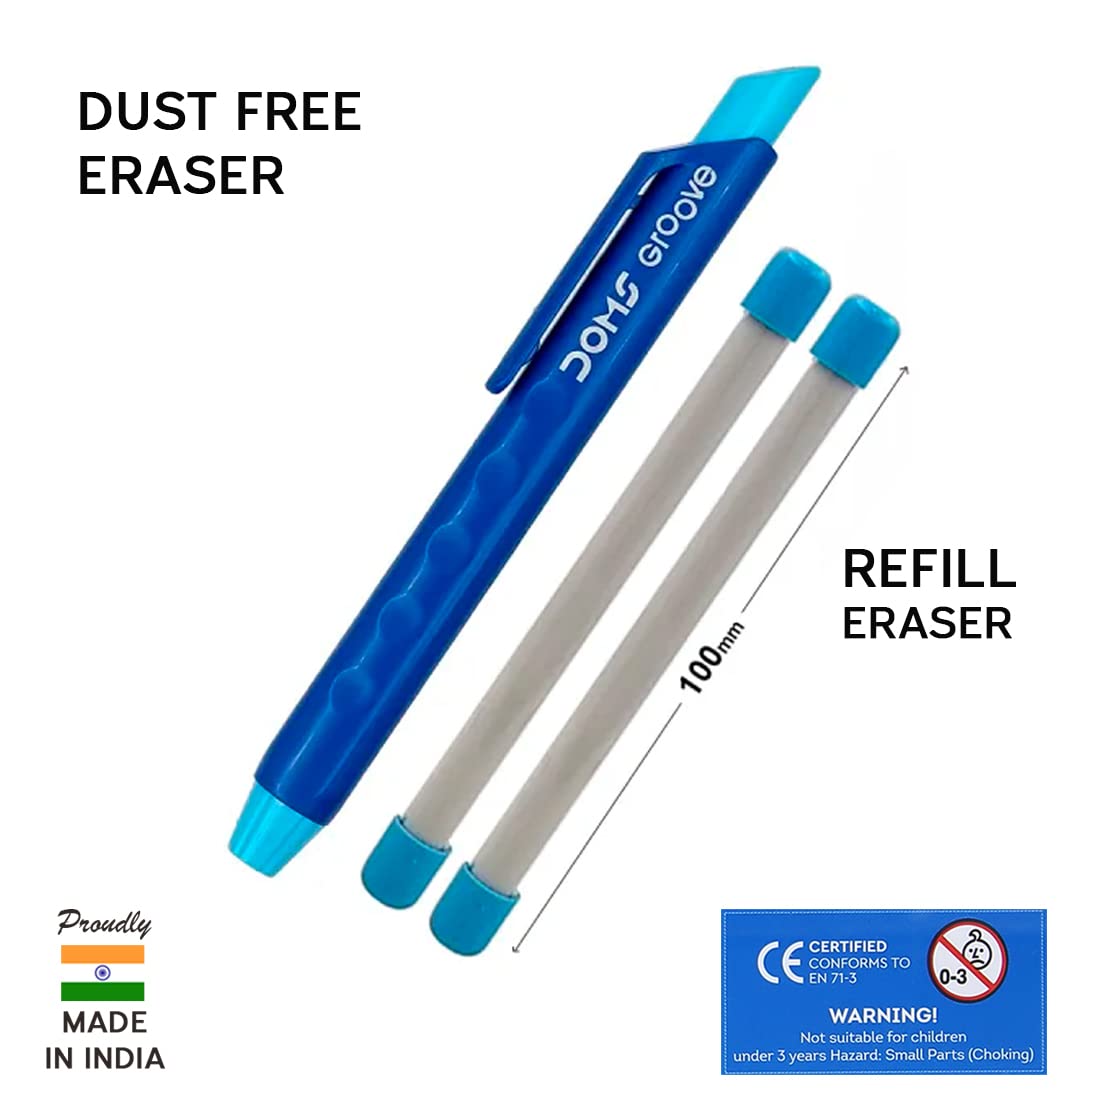 Doms Groove Retractable Eraser With Free Two Refill Eraser